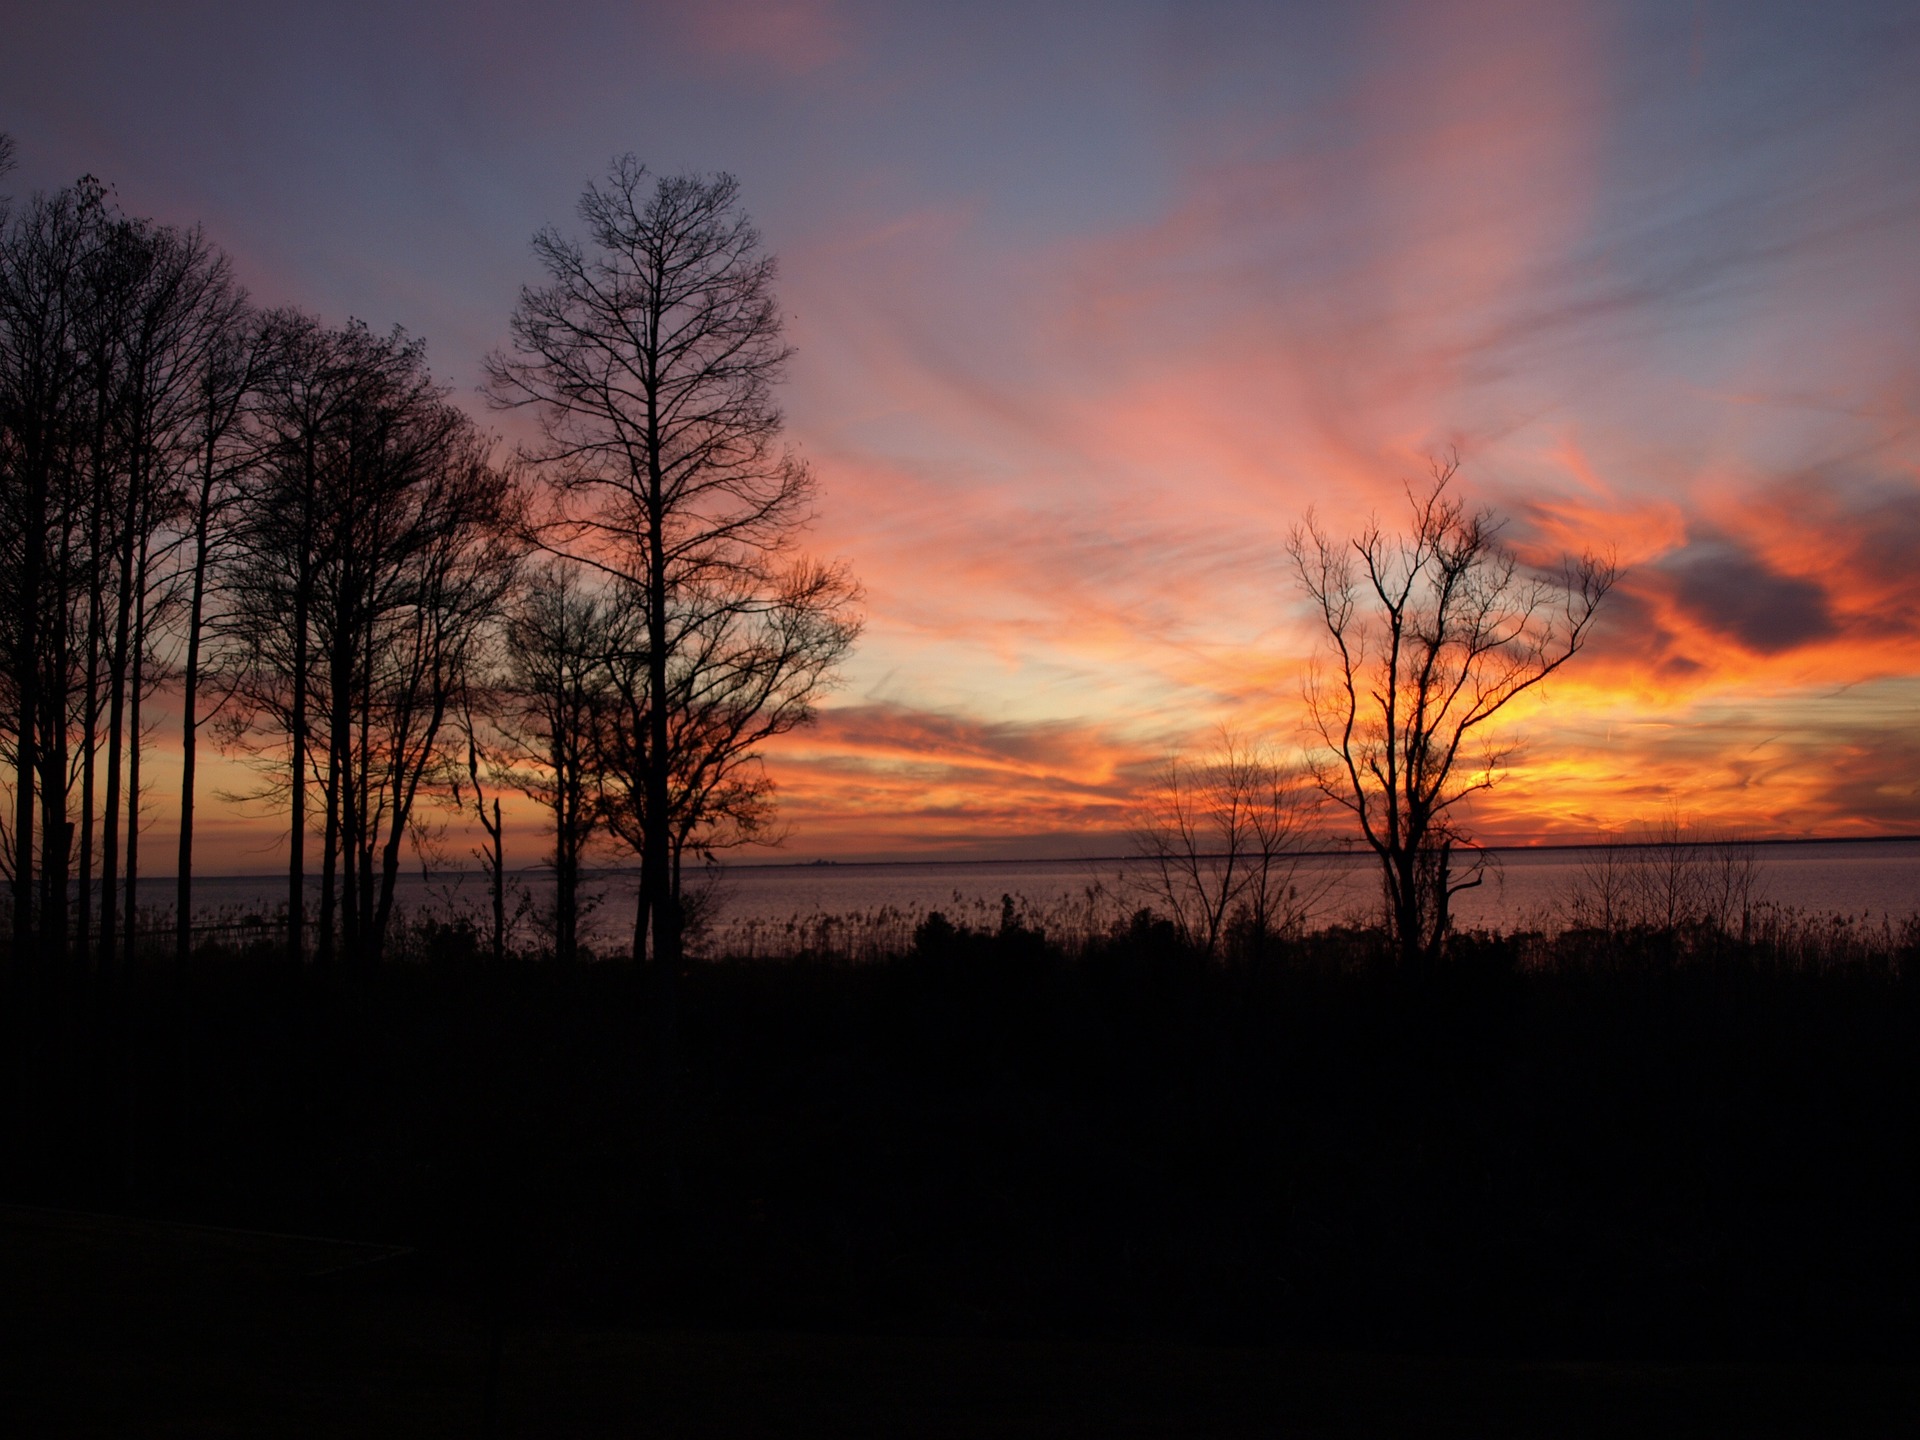 A sunset looking out over Mobile Bay